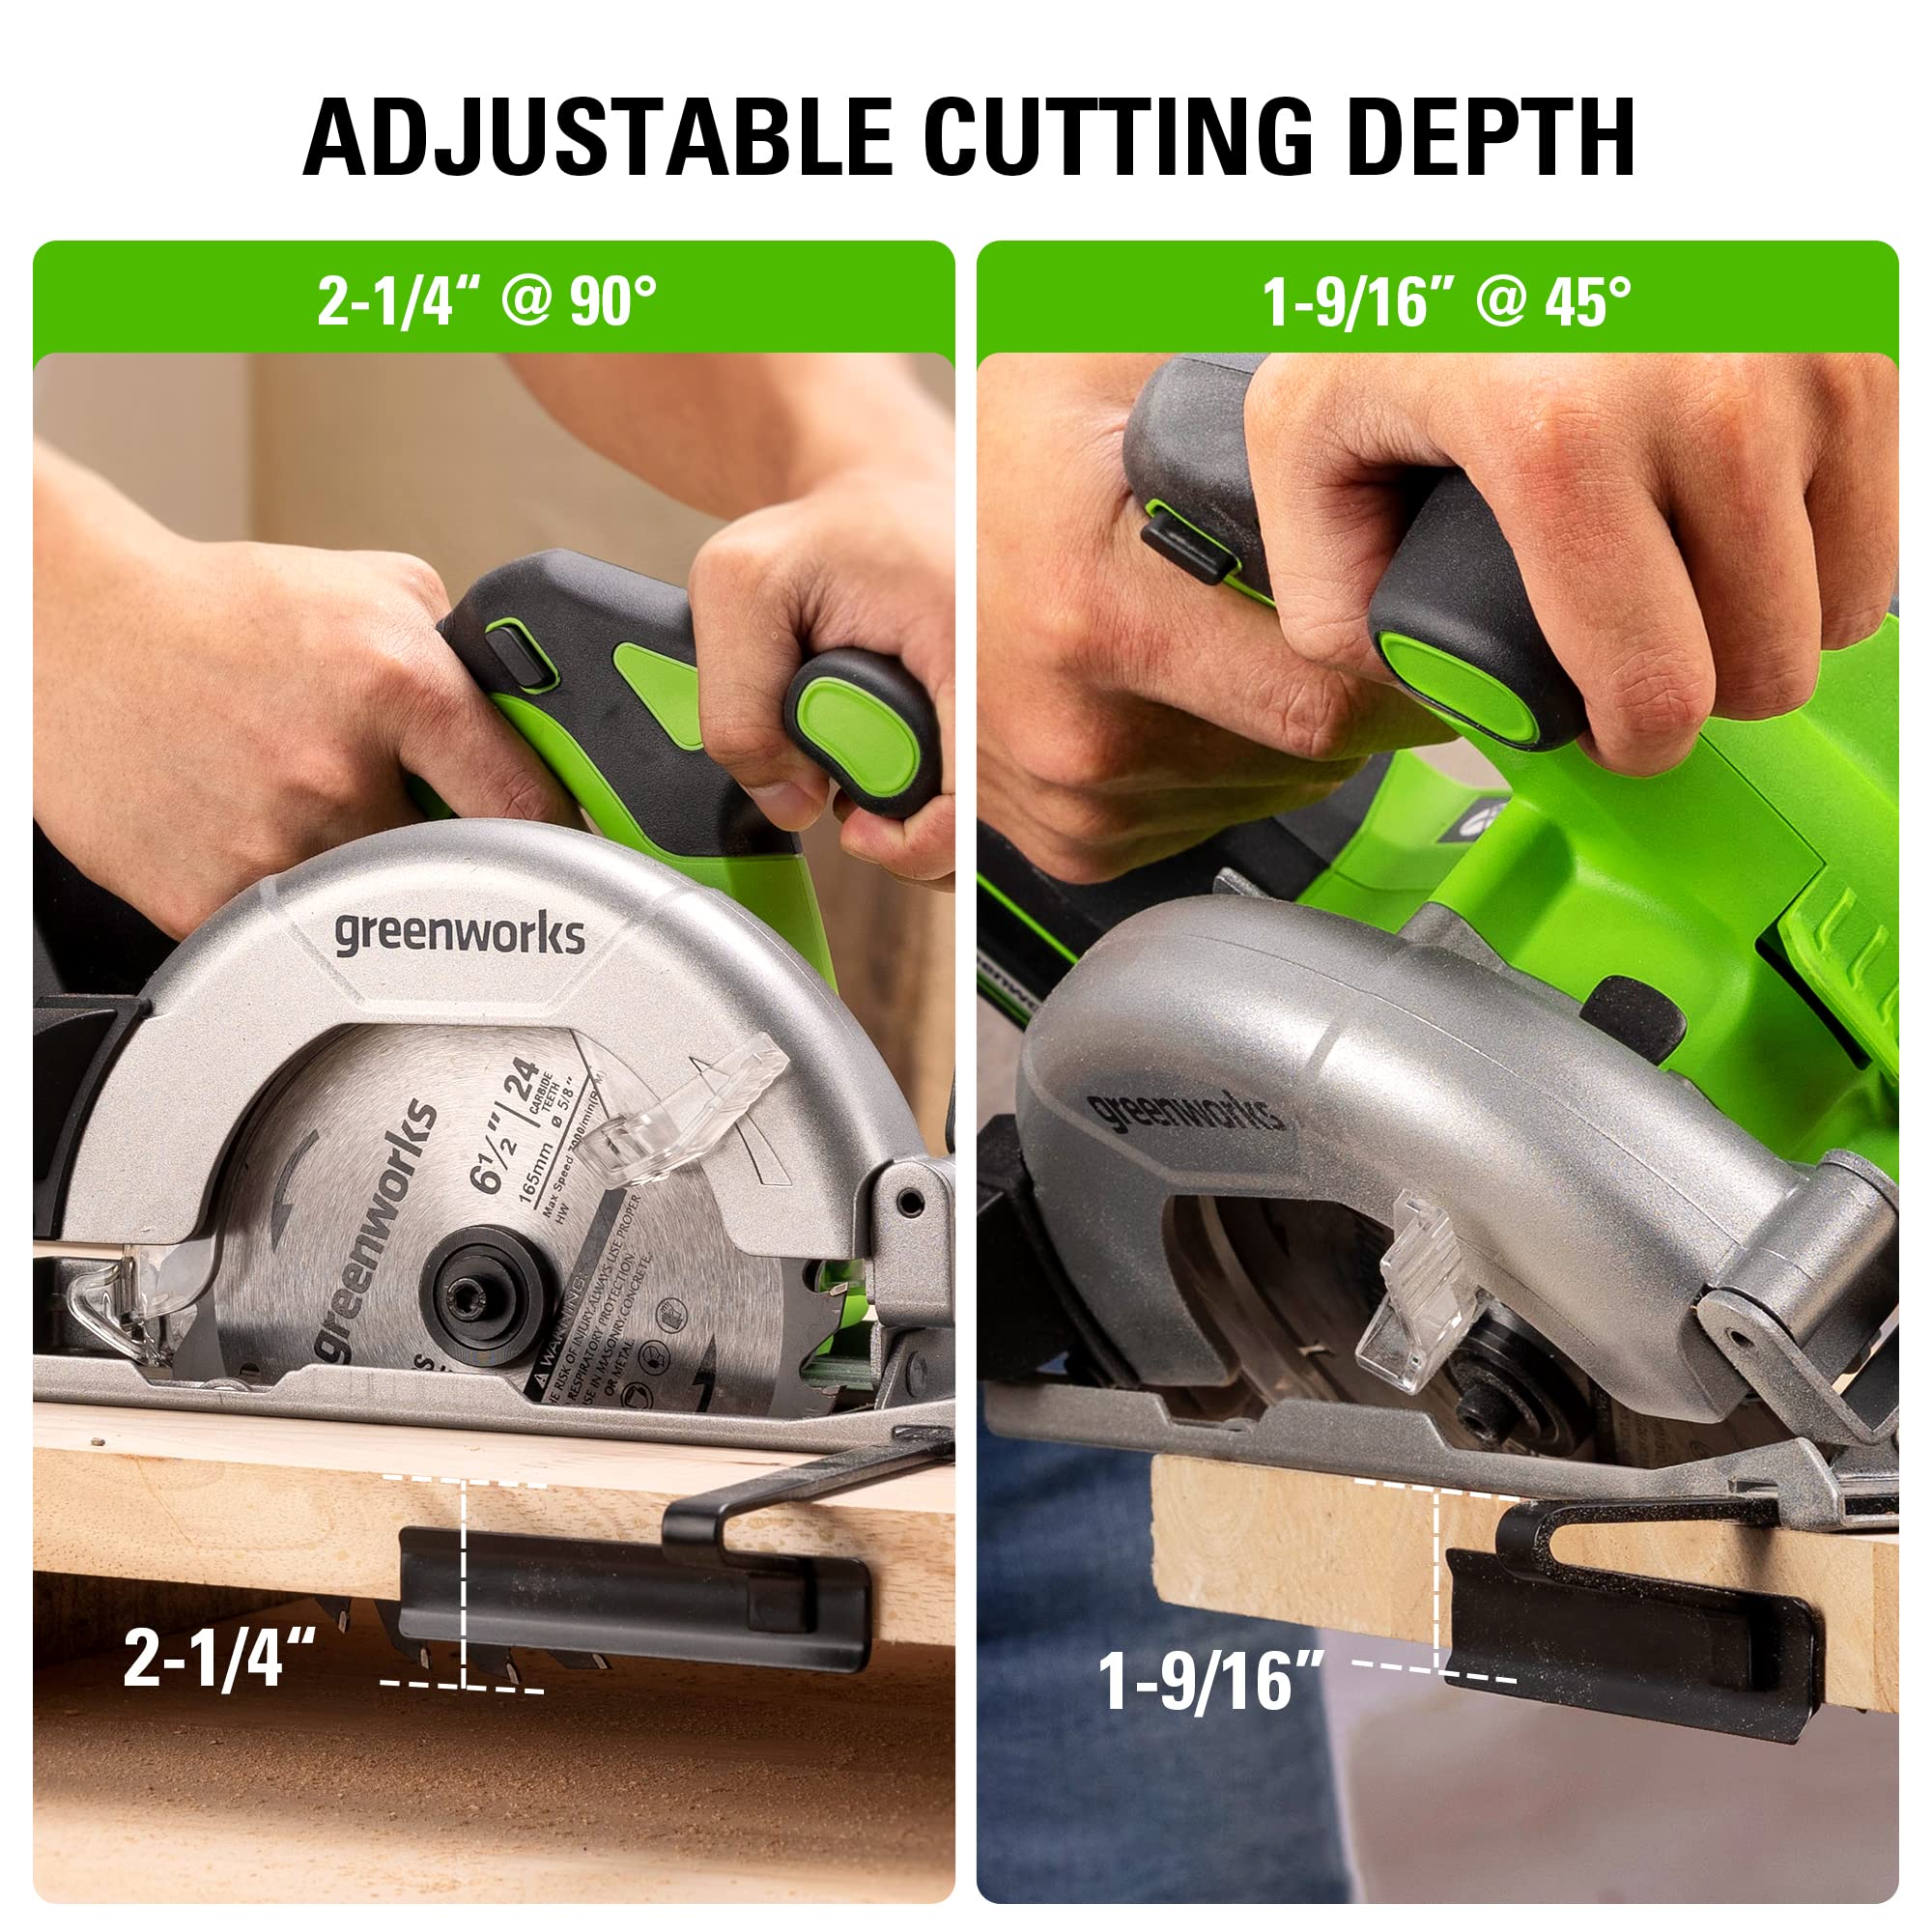 Greenworks 24V Brushless 6-1/2" Circular Saw Kit, 4,800 RPM, Adjustable Cutting Depth 45°/90°, With 24V 2Ah Battery and Charger